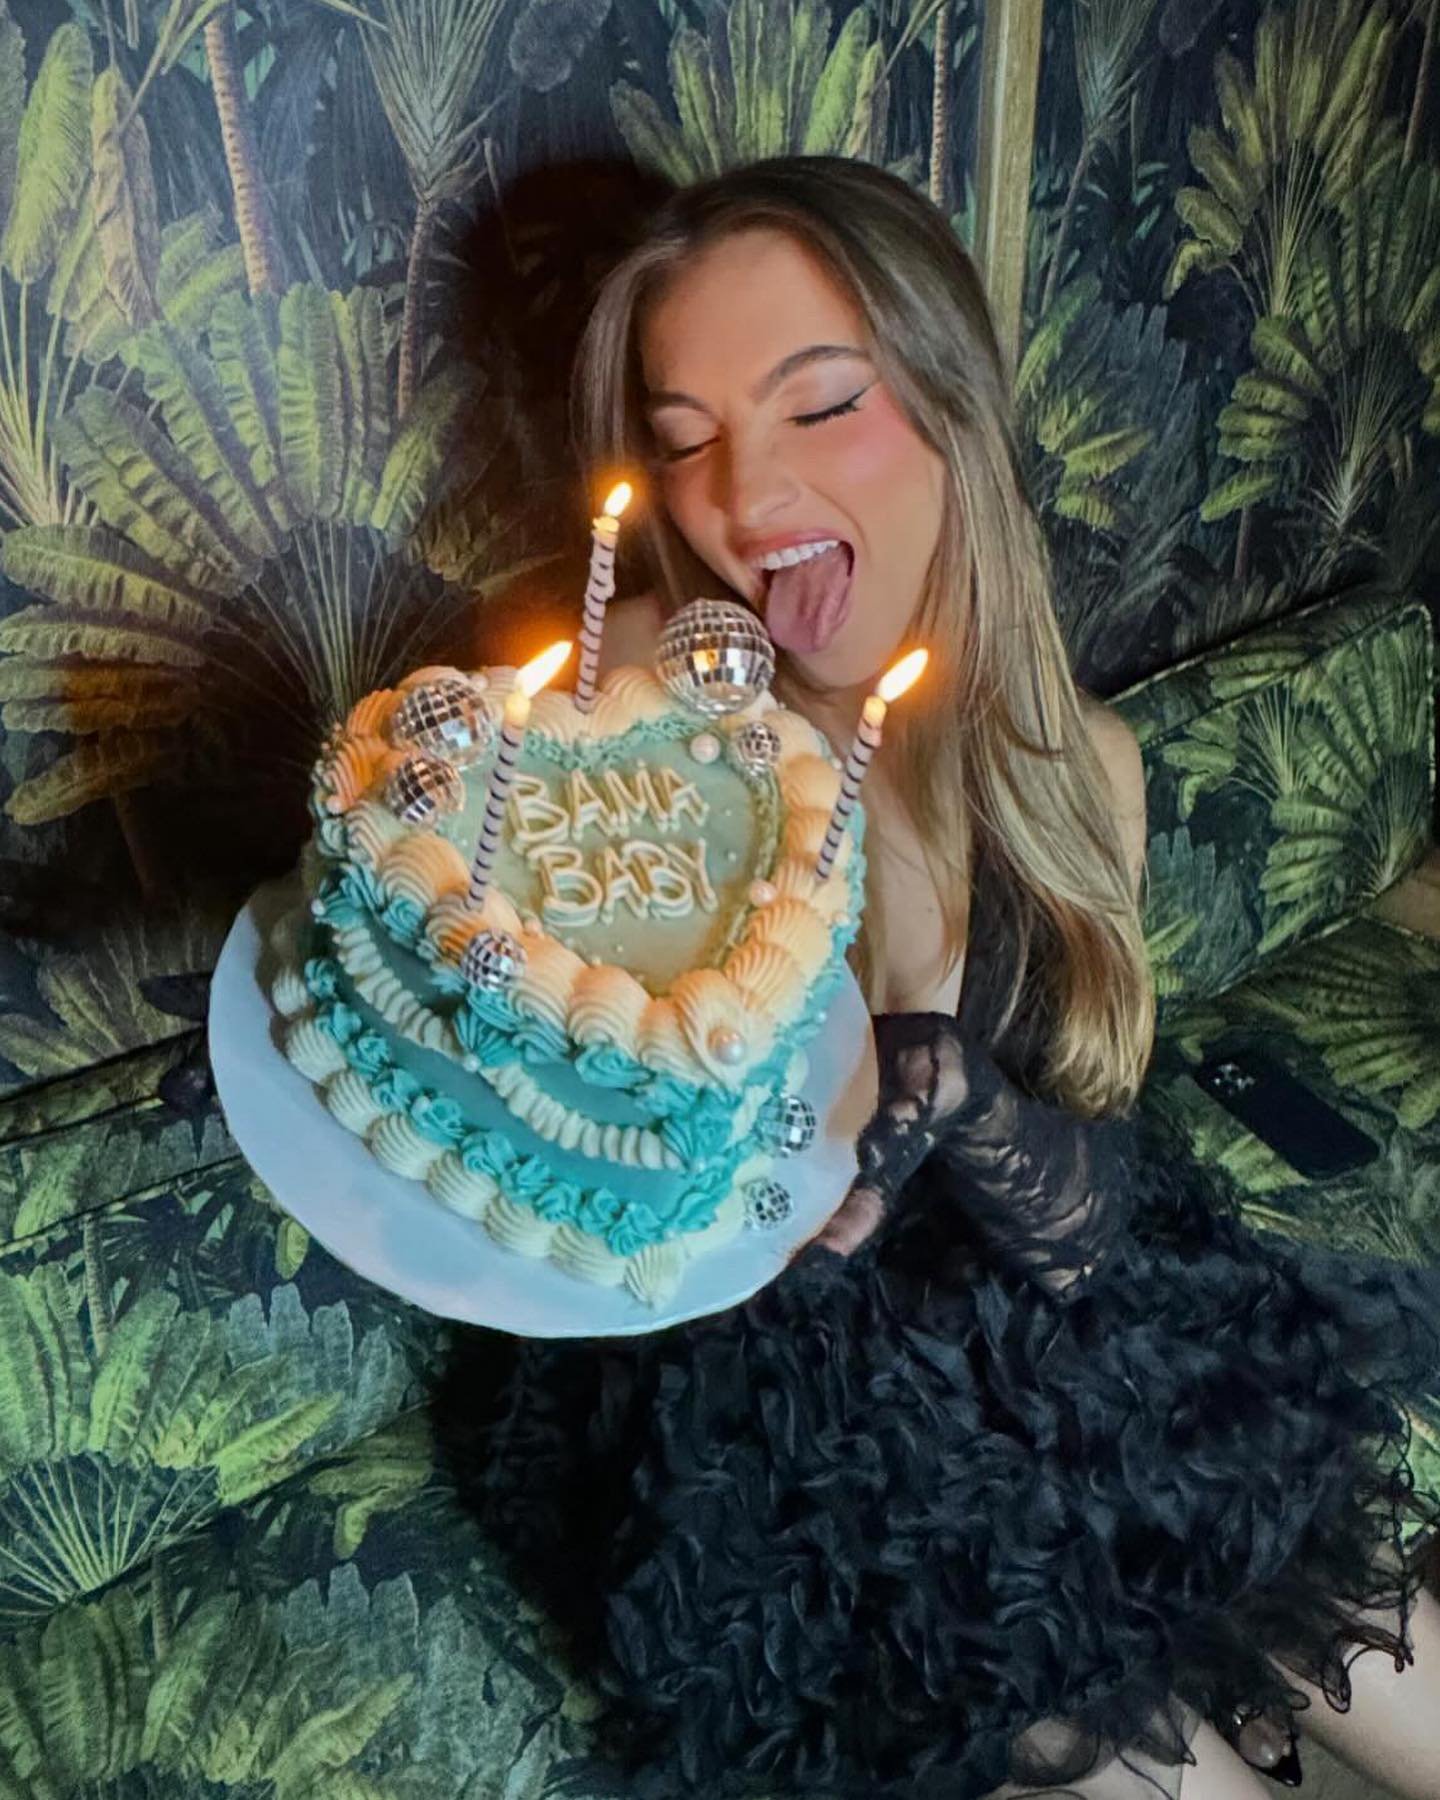 When you&rsquo;re bummed you didn&rsquo;t get pics of the cake you made, but then it turns out the Birthday Girl also happens to be the best Cake Model ever.✨
.
.
.
#discocake #cakemodel #vintagecake #heartcake #vintageheartcake #blueheartcake #caked